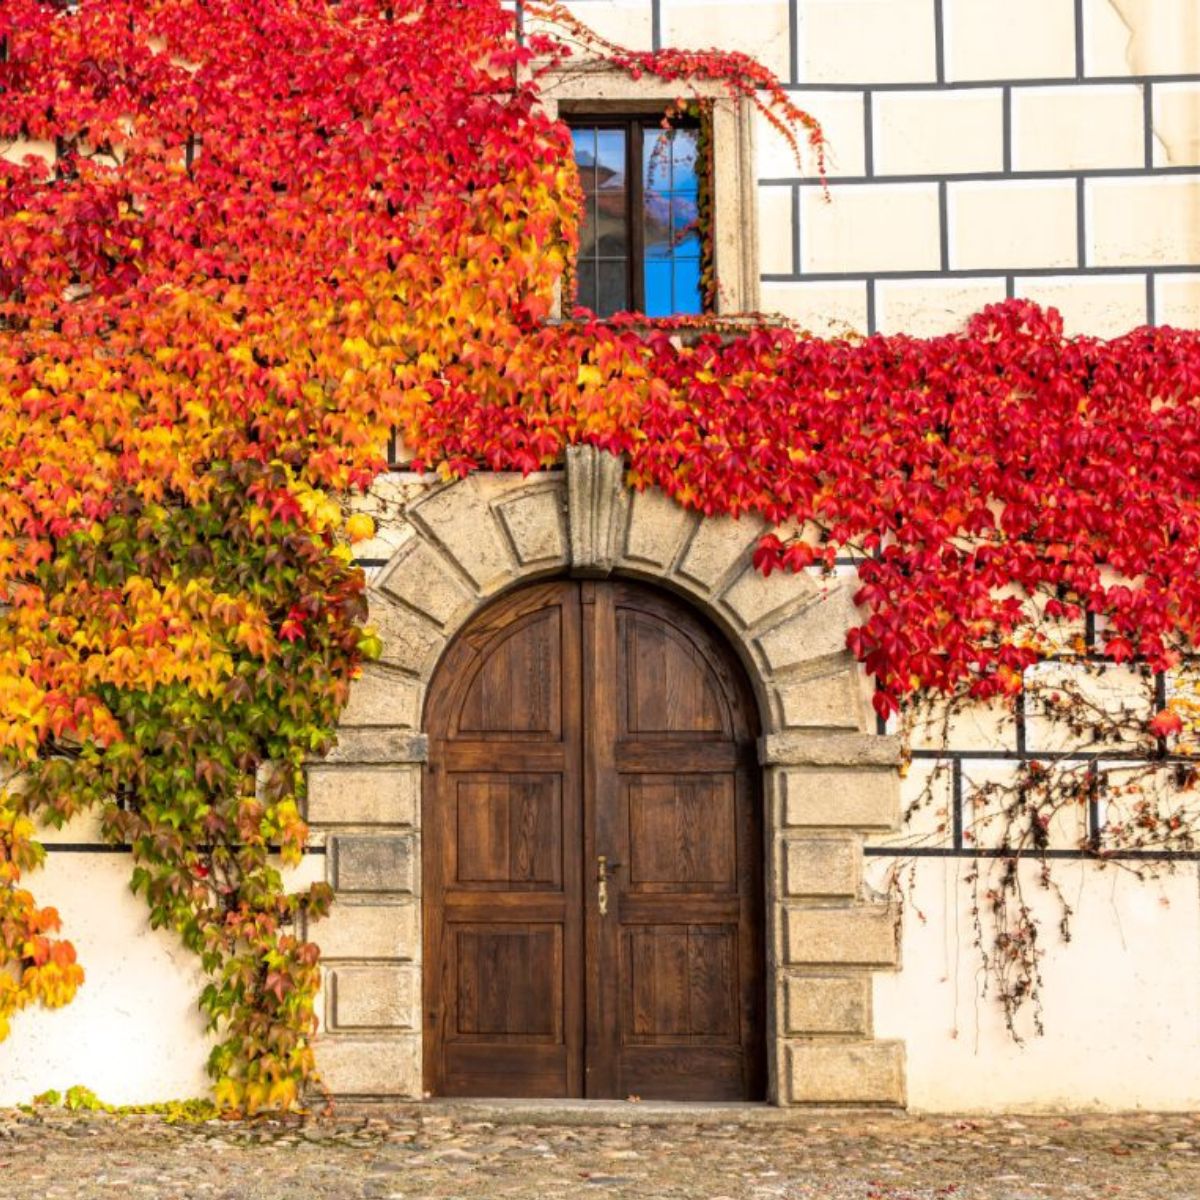 House facade with an ornate wooden door in stone surround and a window with Virginia creeper in beautiful autumn colors.